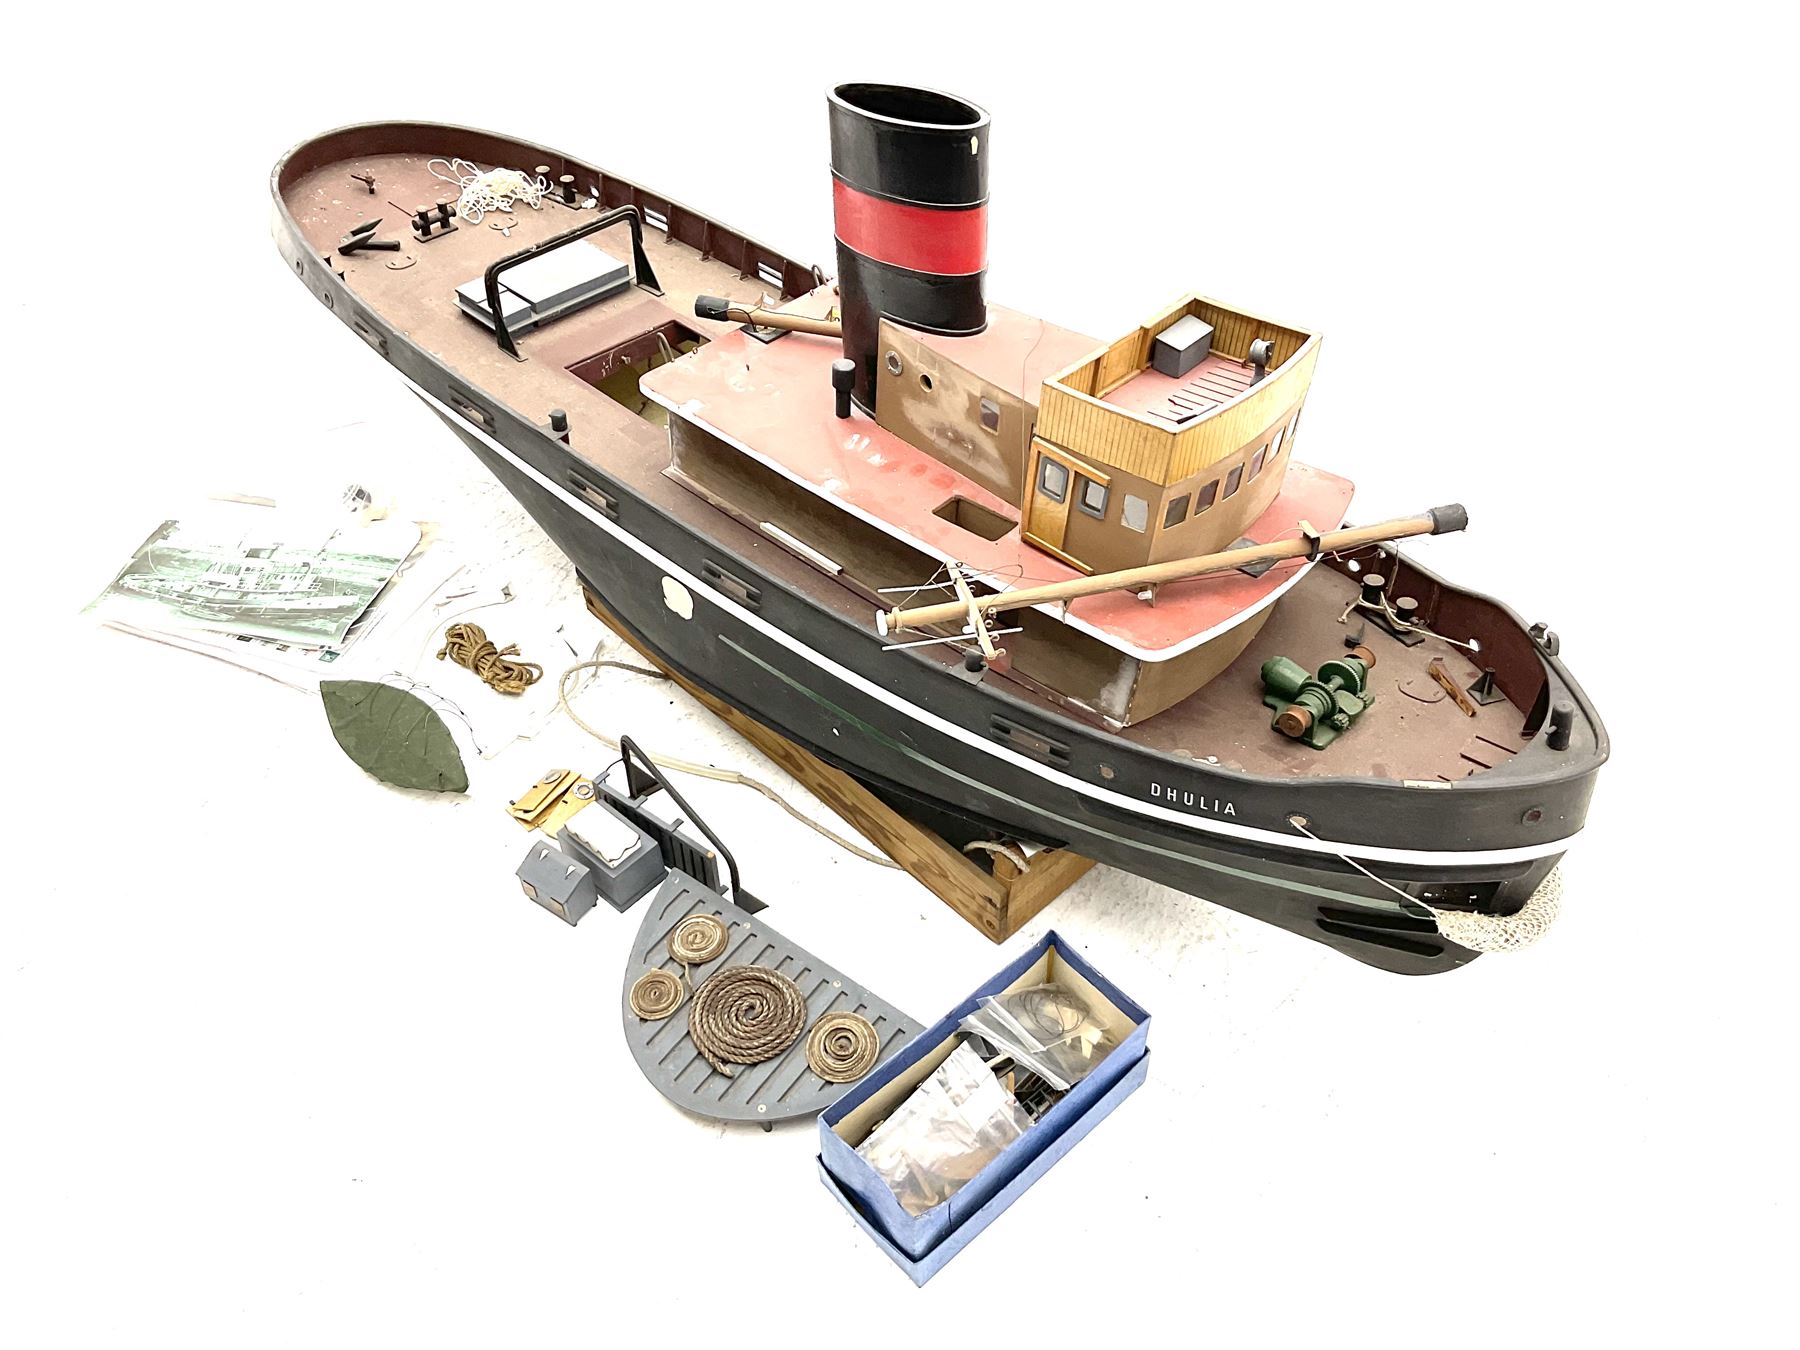 Large model of the tugboat 'Dhulia' on a wooden stand L144cm - Image 2 of 14